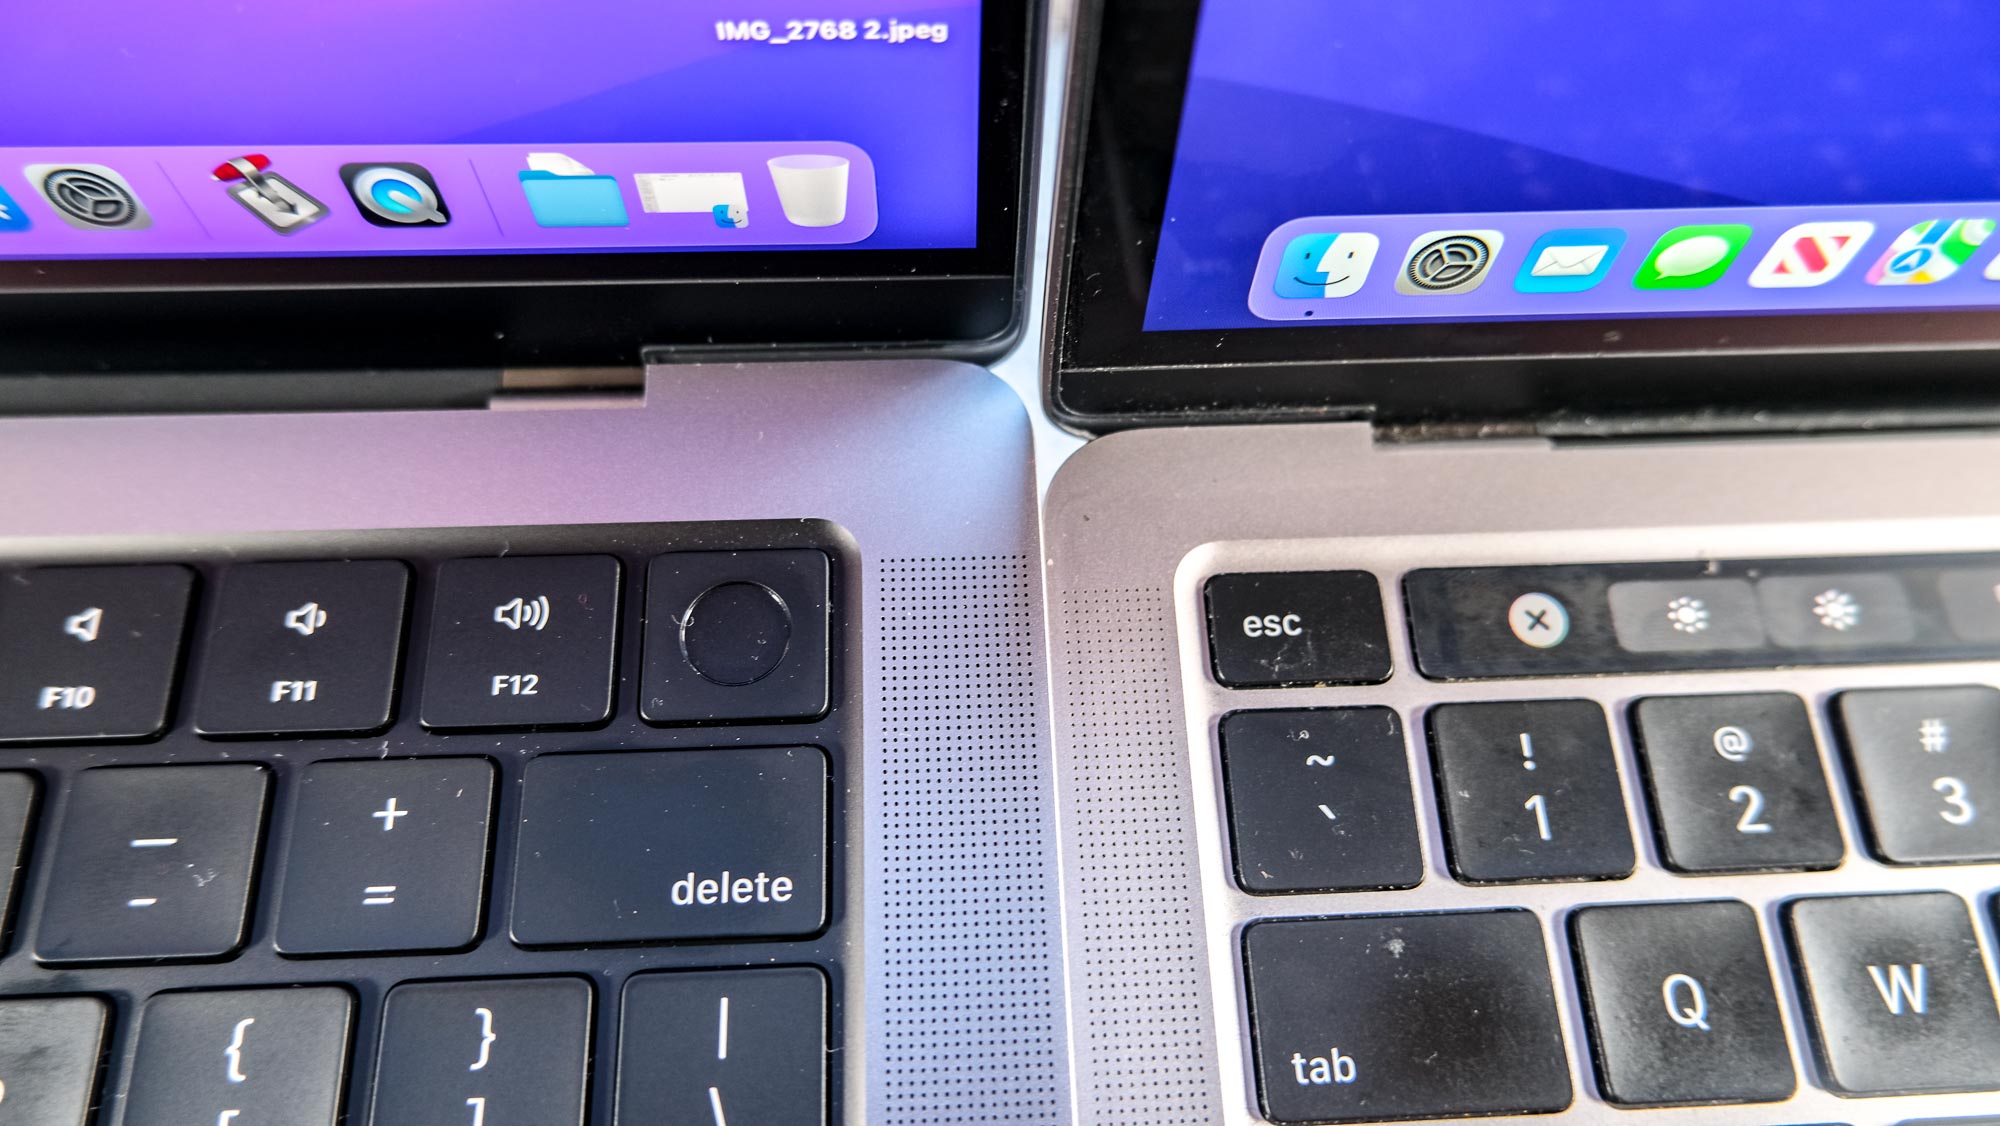 The MacBook Pro 2021 (14-inch)'s Function